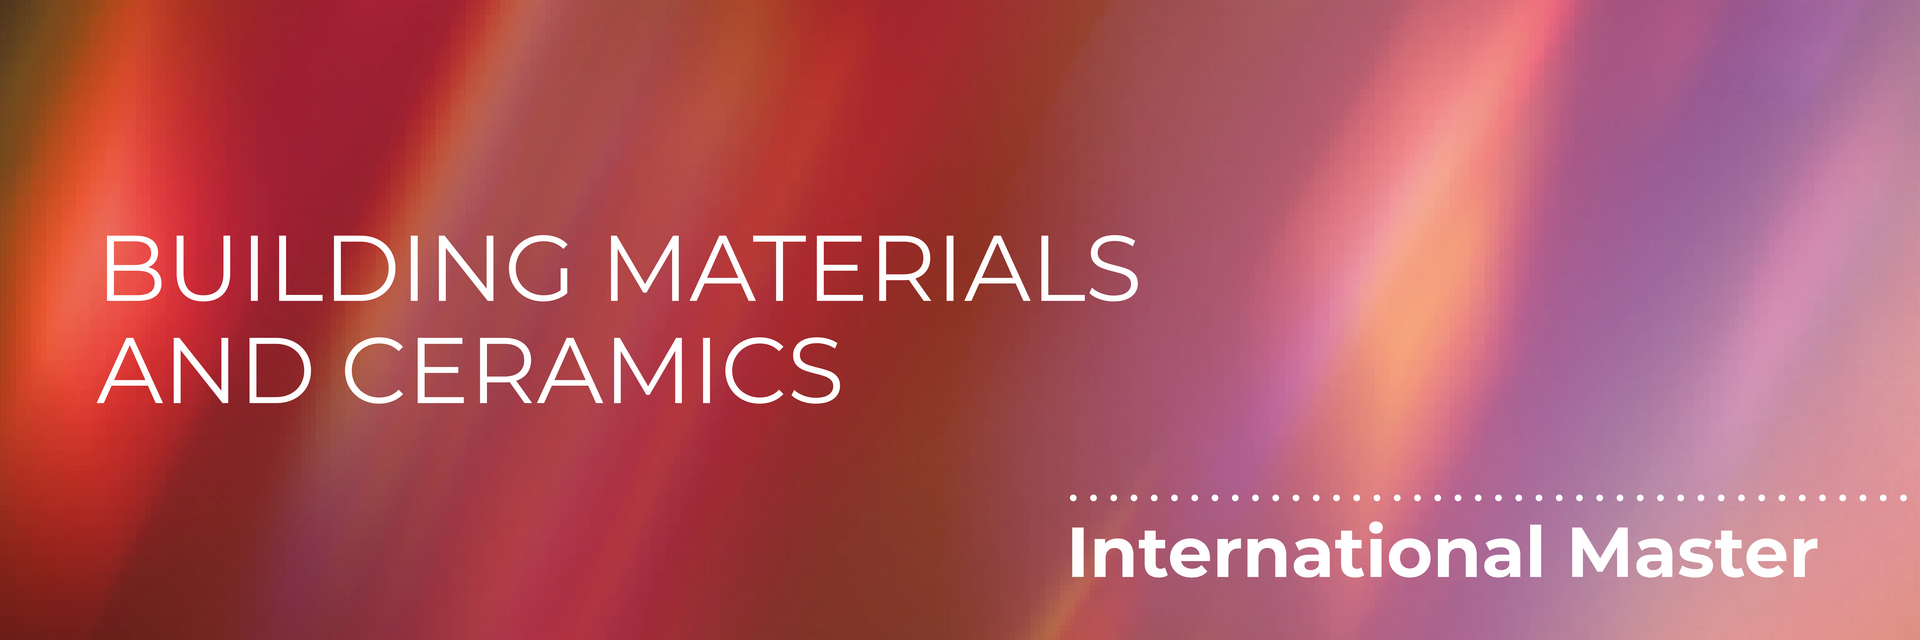 International Master of Science in Building Materials and Ceramics